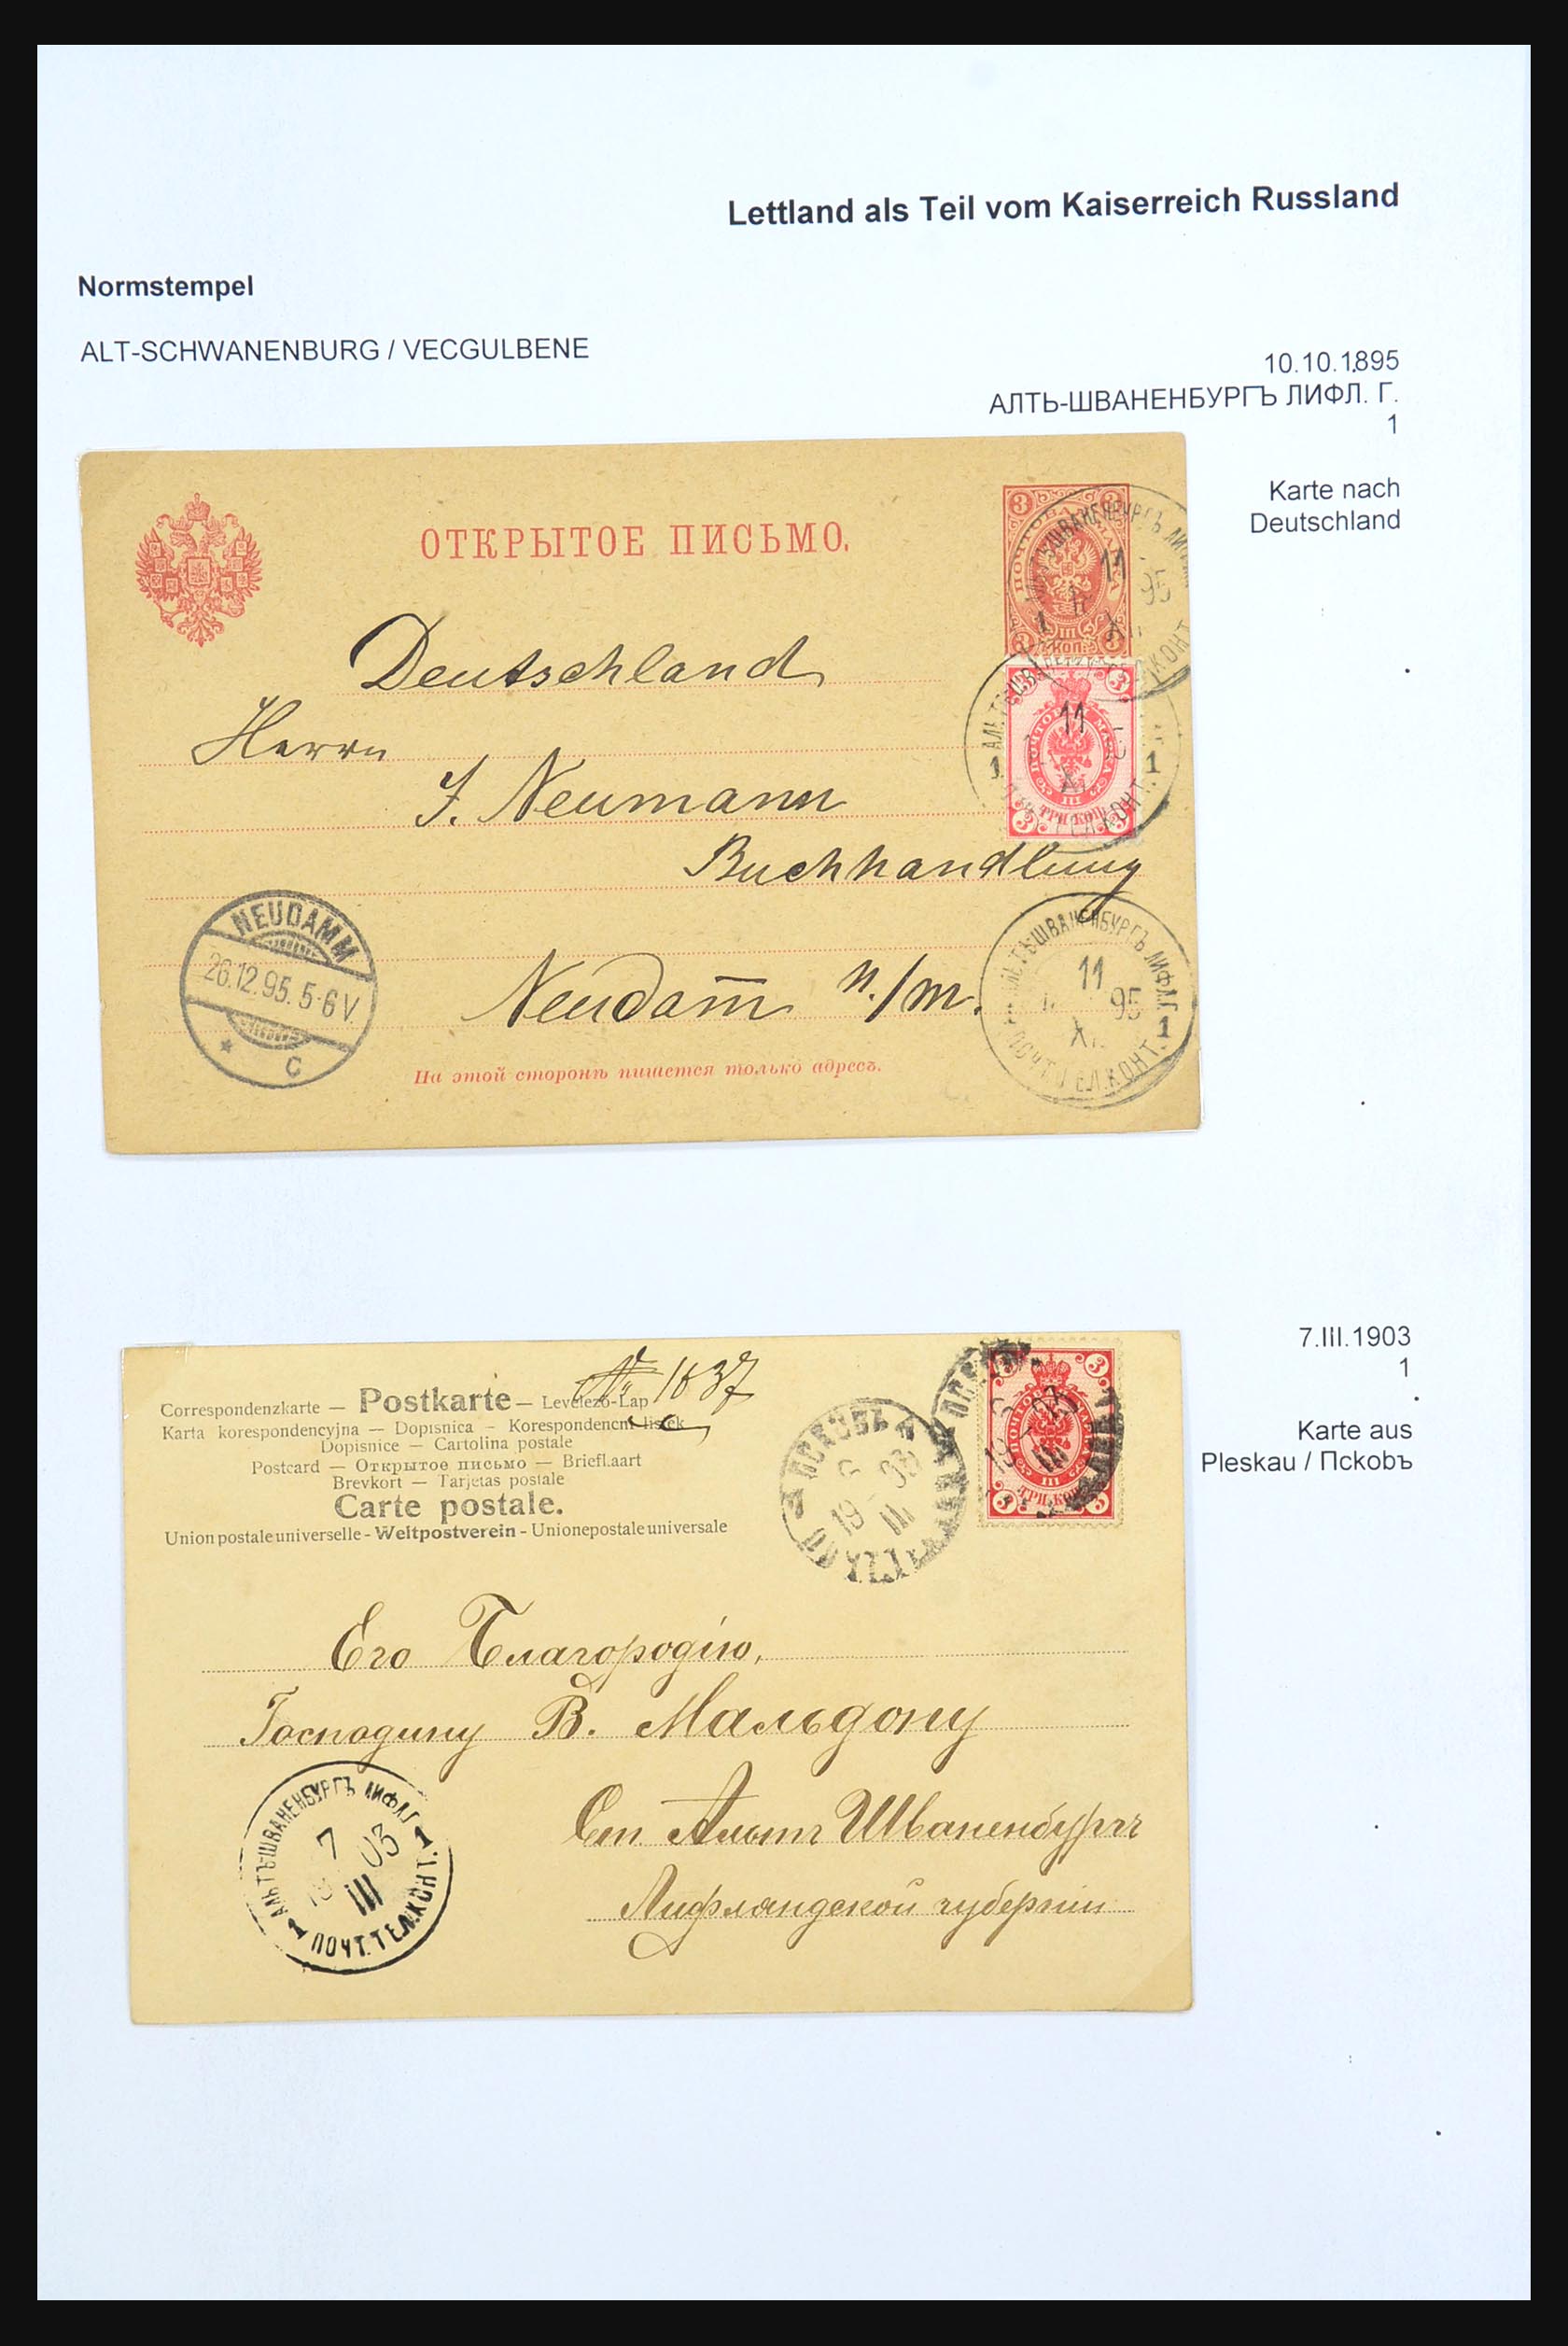 31305 077 - 31305 Latvia as part of Russia 1817-1918.